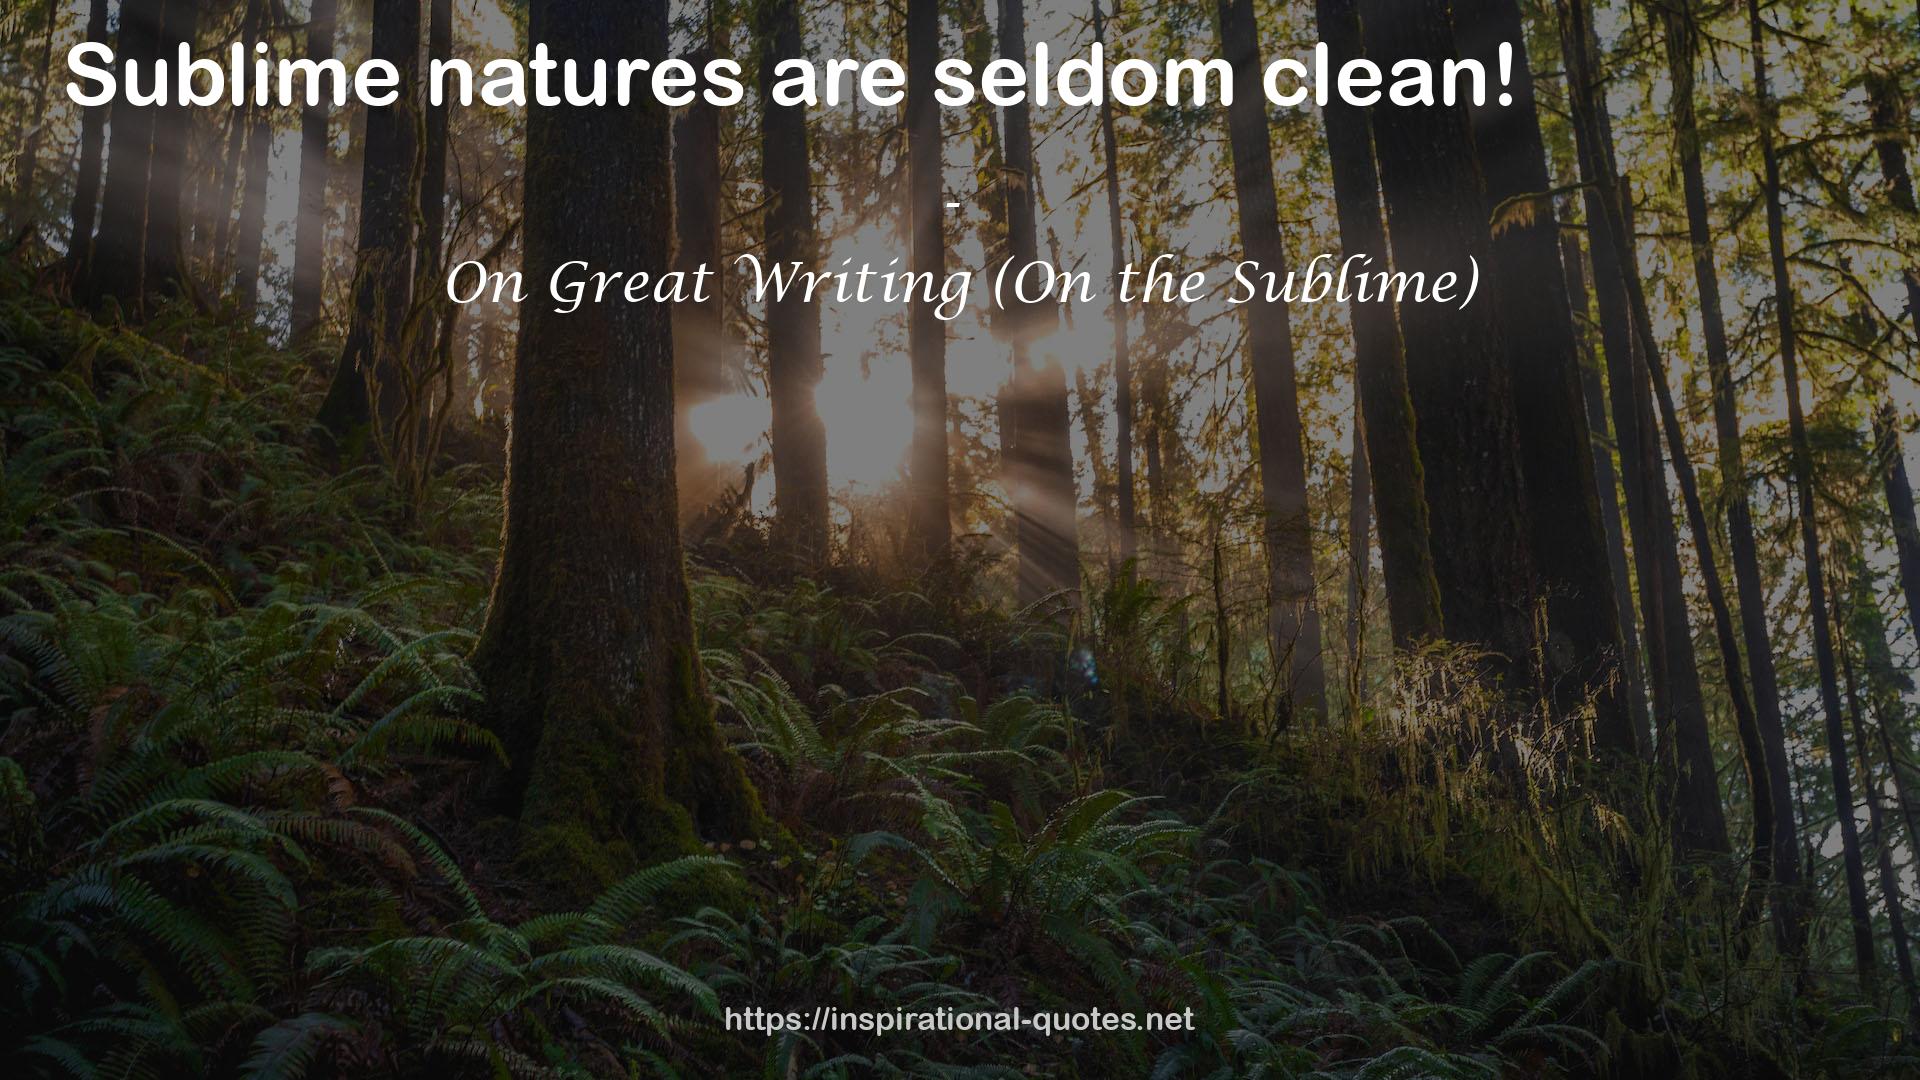 On Great Writing (On the Sublime) QUOTES